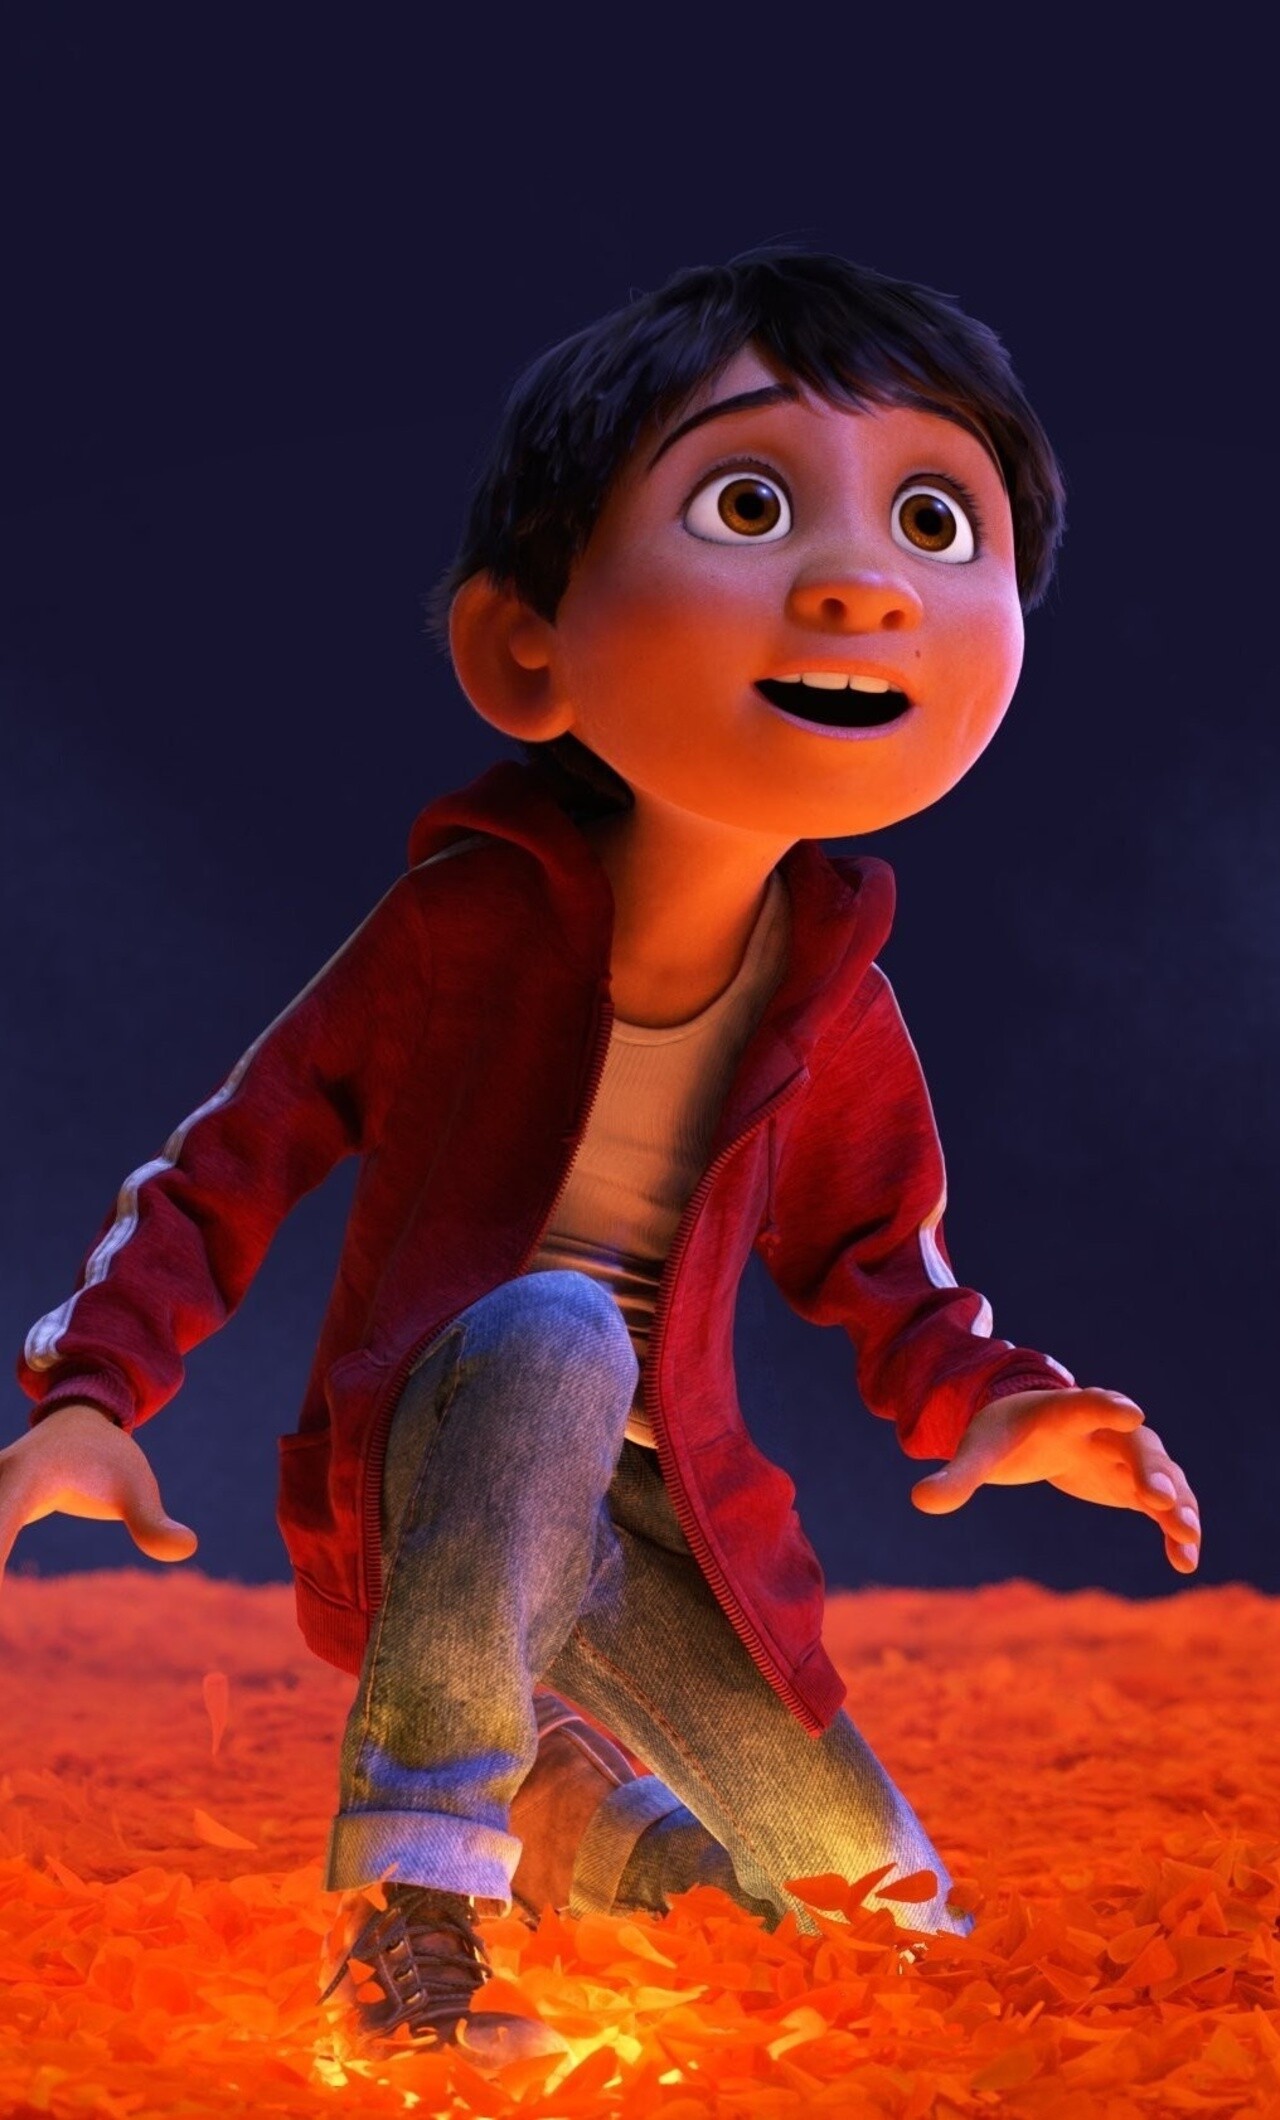 Coco (Cartoon): An animated adventure featuring the voices of Anthony Gonzalez and Gael Garcia Bernal. 1280x2120 HD Wallpaper.